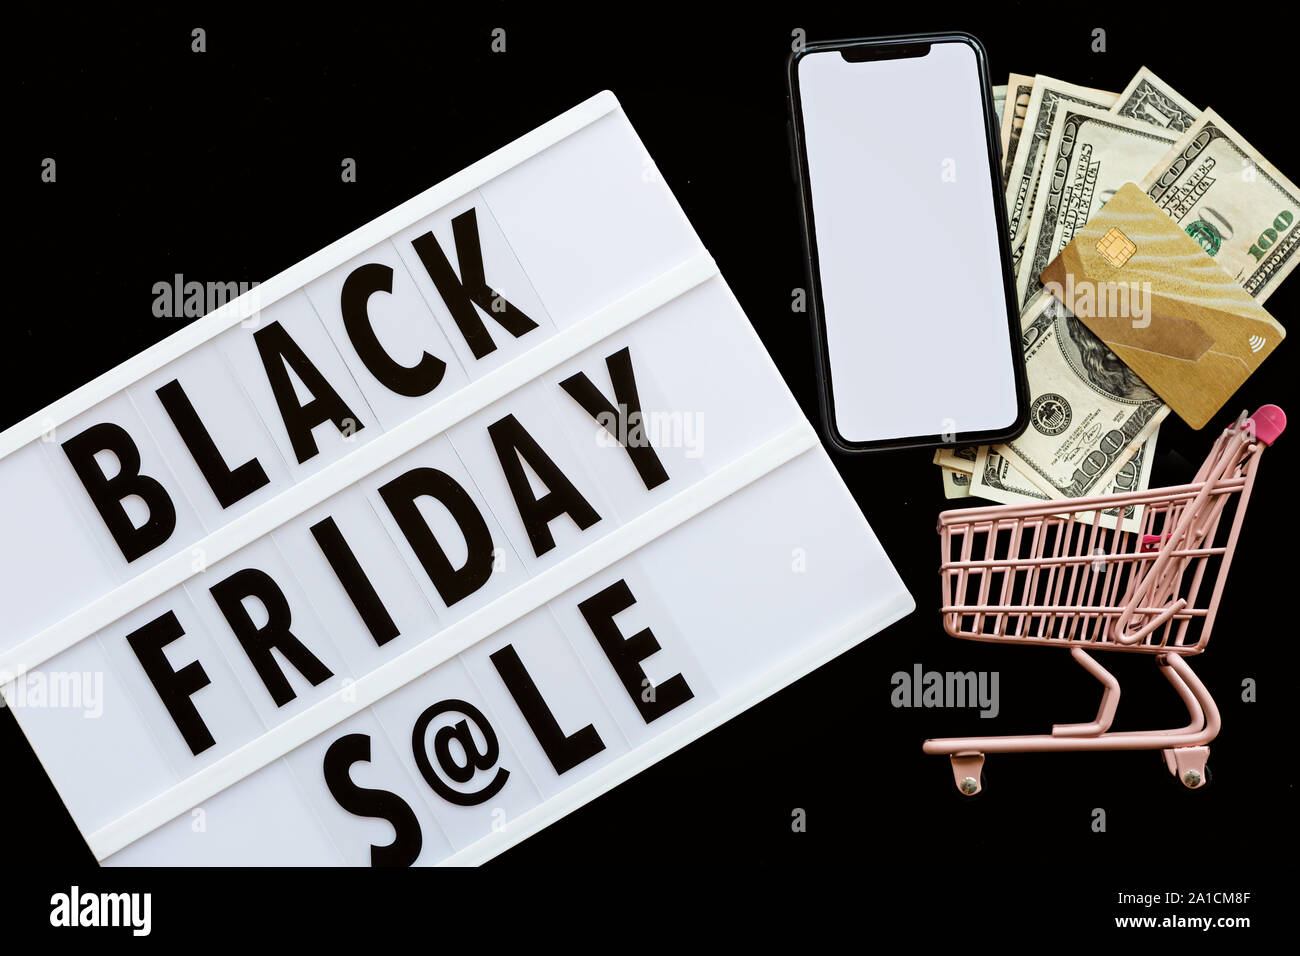 Creative promotion composition Black friday sale text on lightbox on black  background, next grocery trolley, mobile phone, credit card, cash money  Stock Photo - Alamy